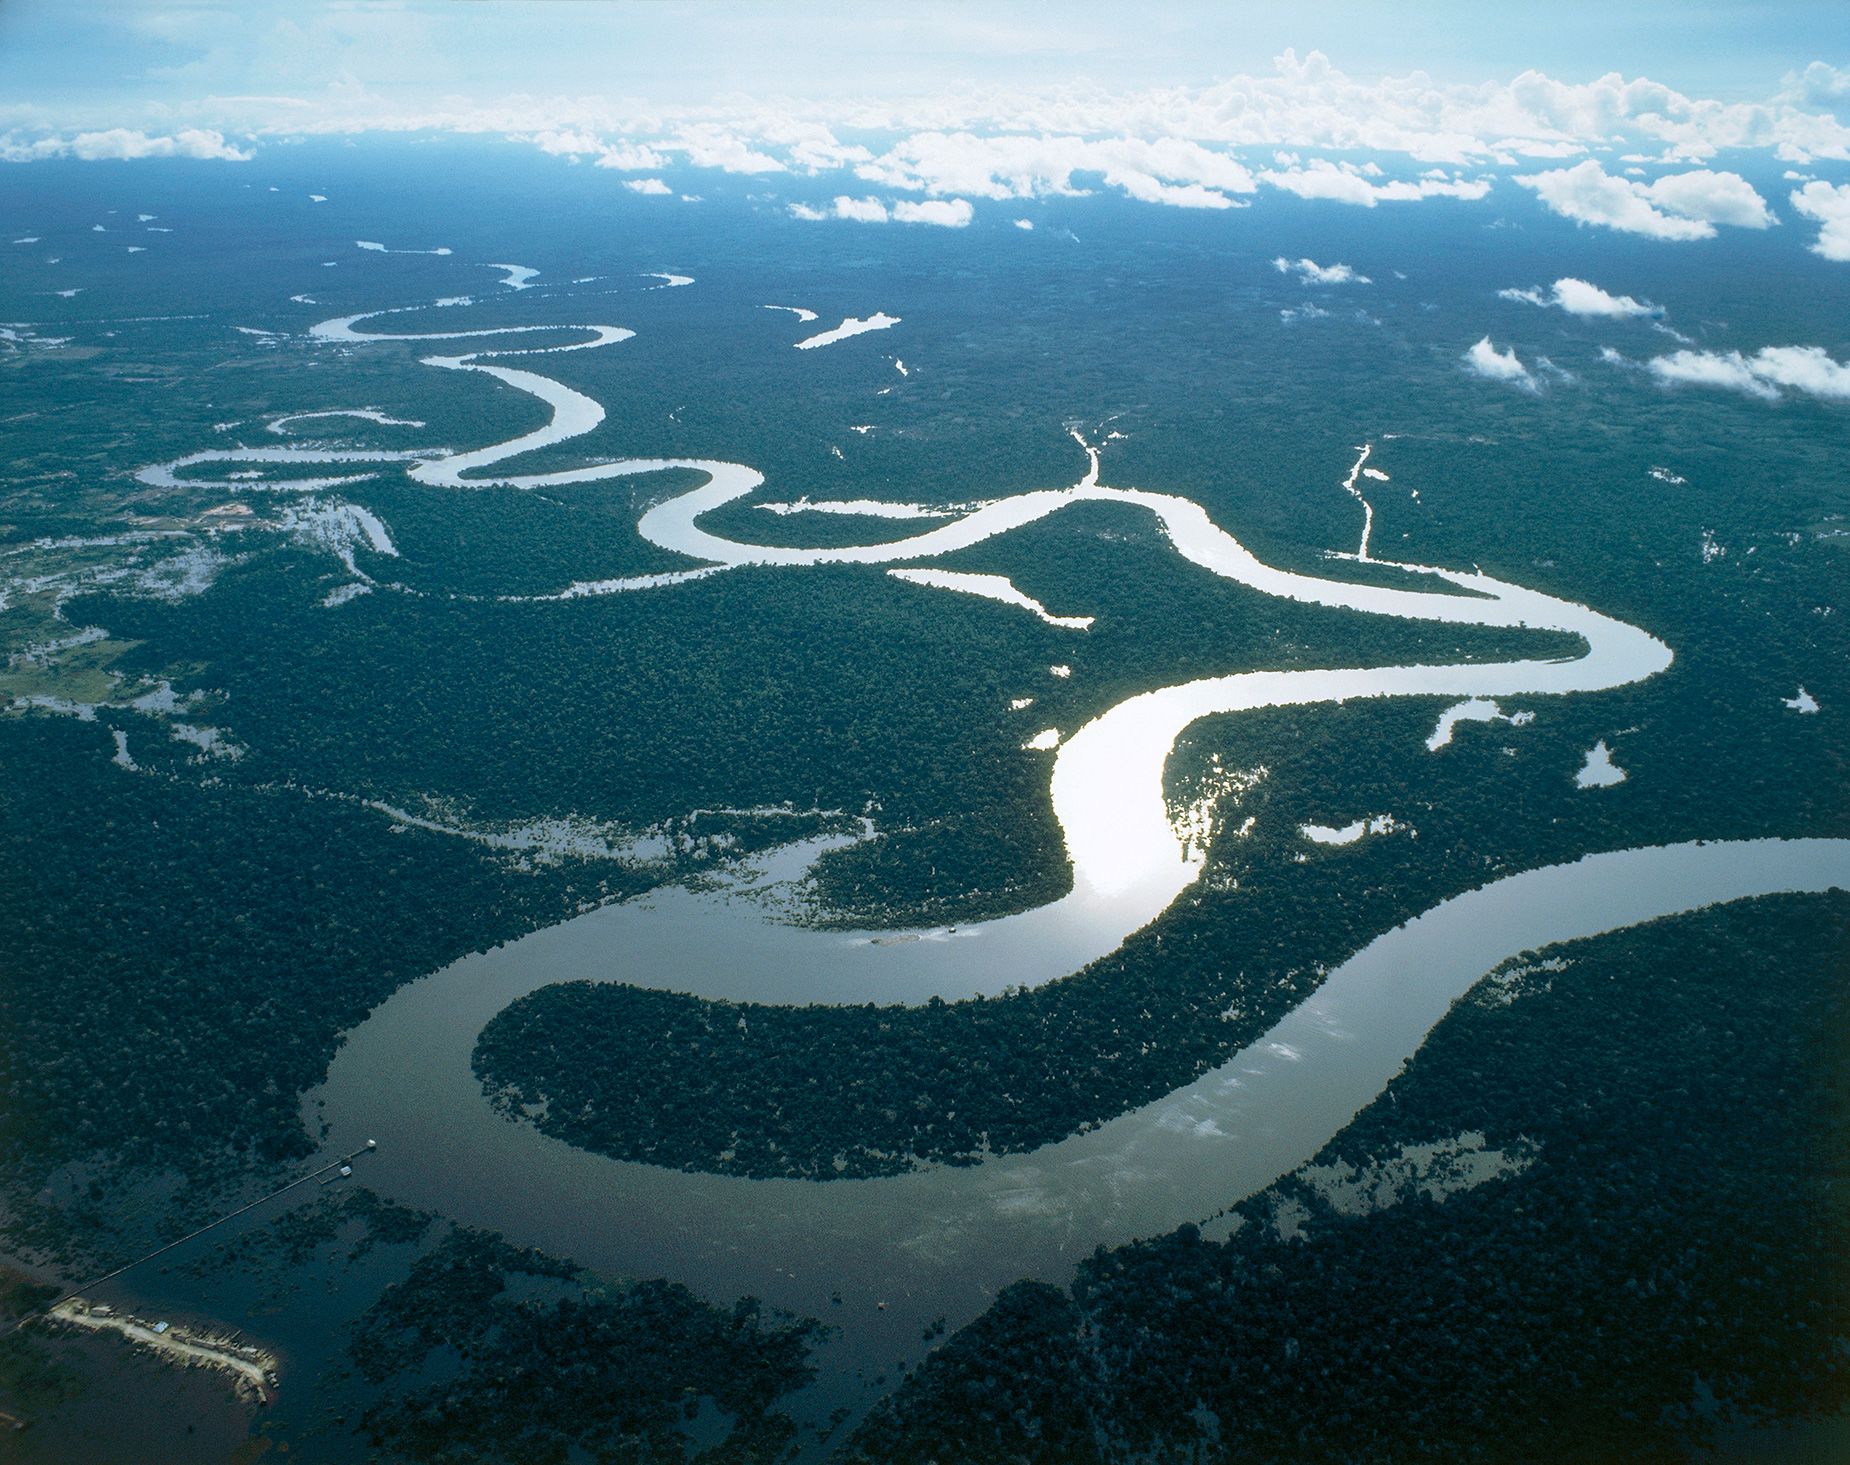 What’s the World’s Longest River? New Expedition Aims to Settle the Debate Once and for All